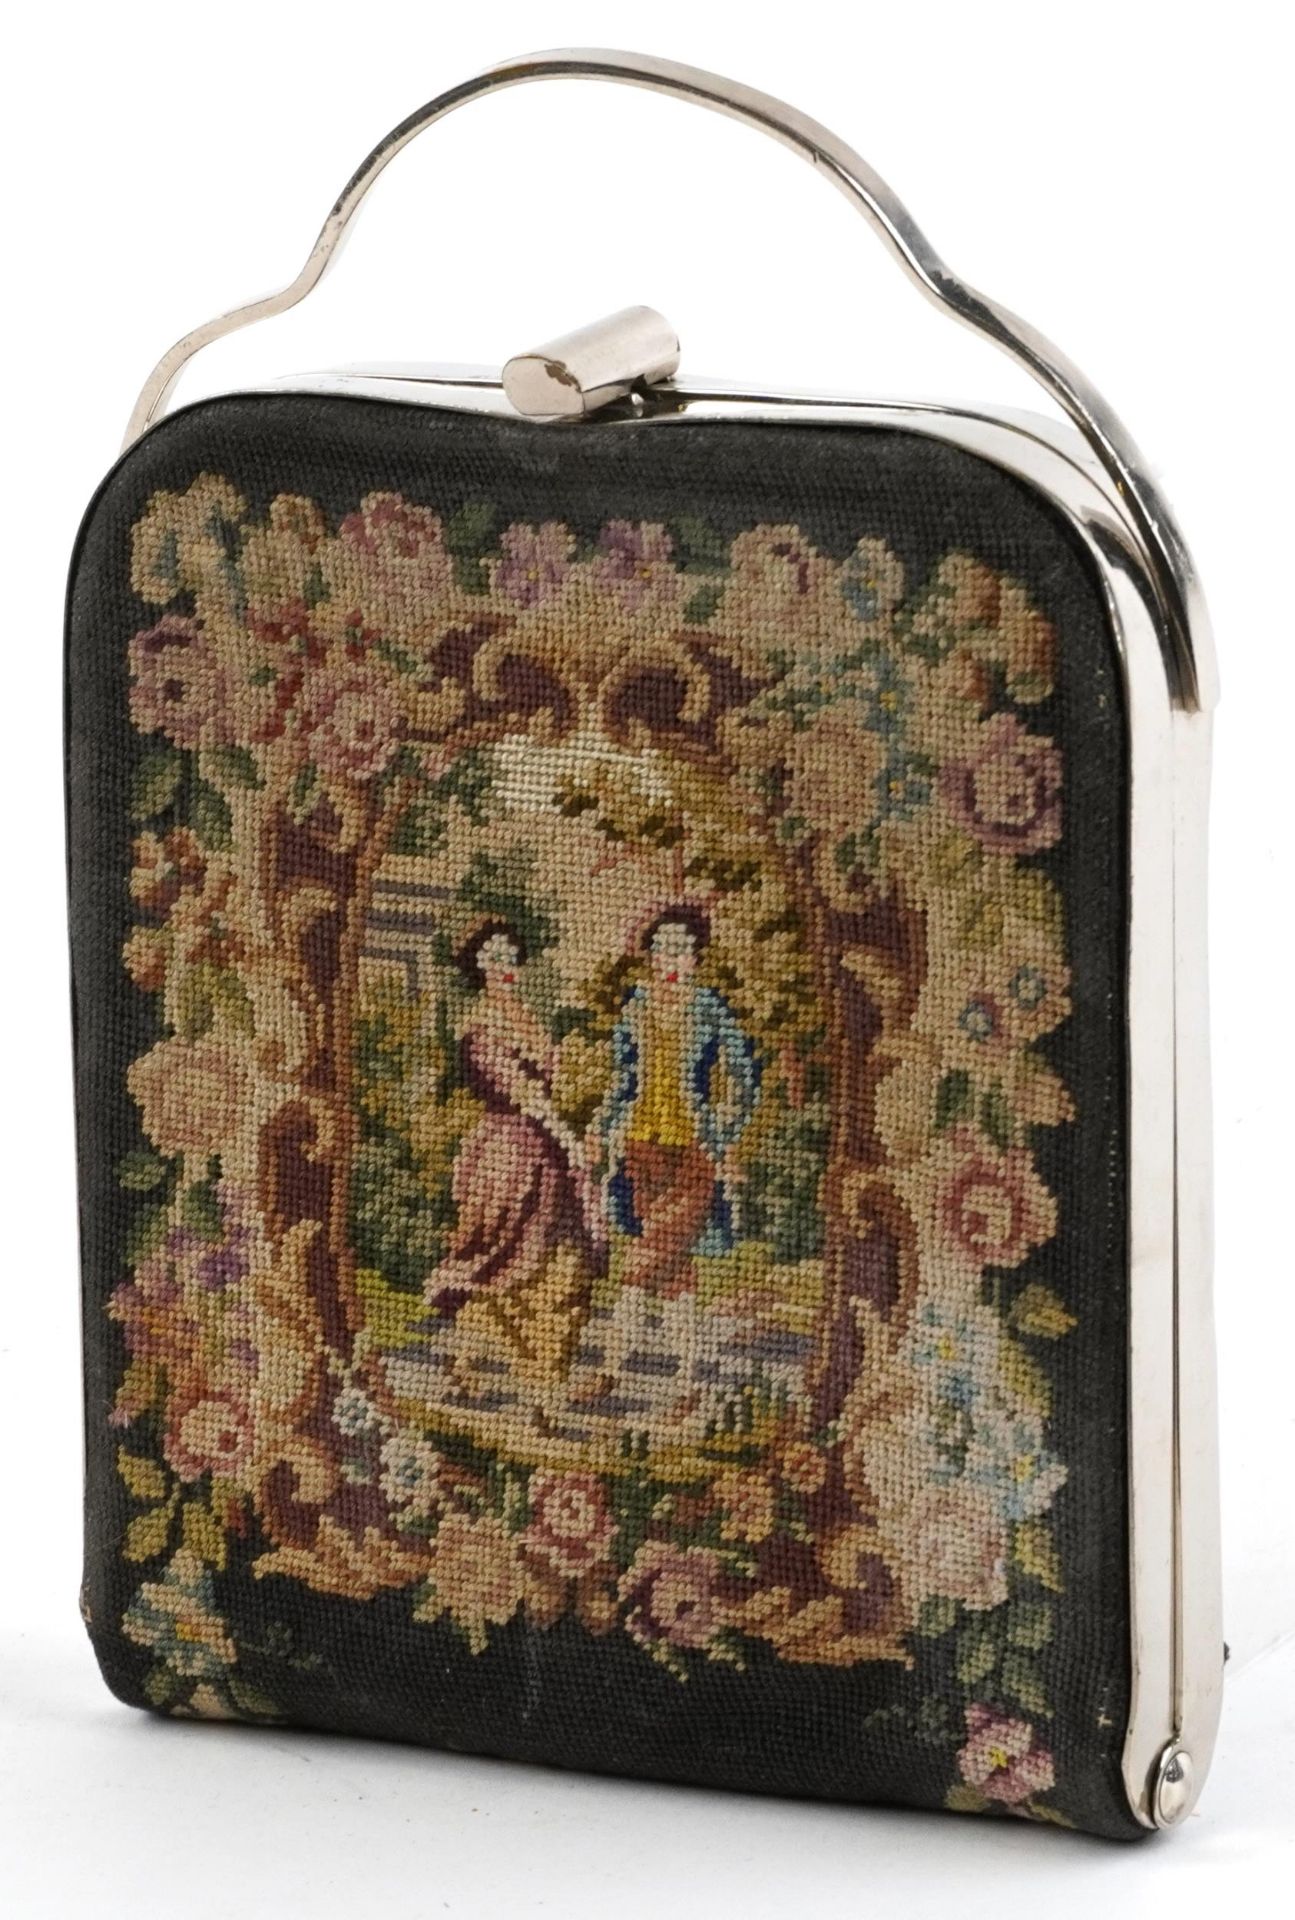 Early 20th century needlework lady's travelling vanity case with mirrored and fitted interior